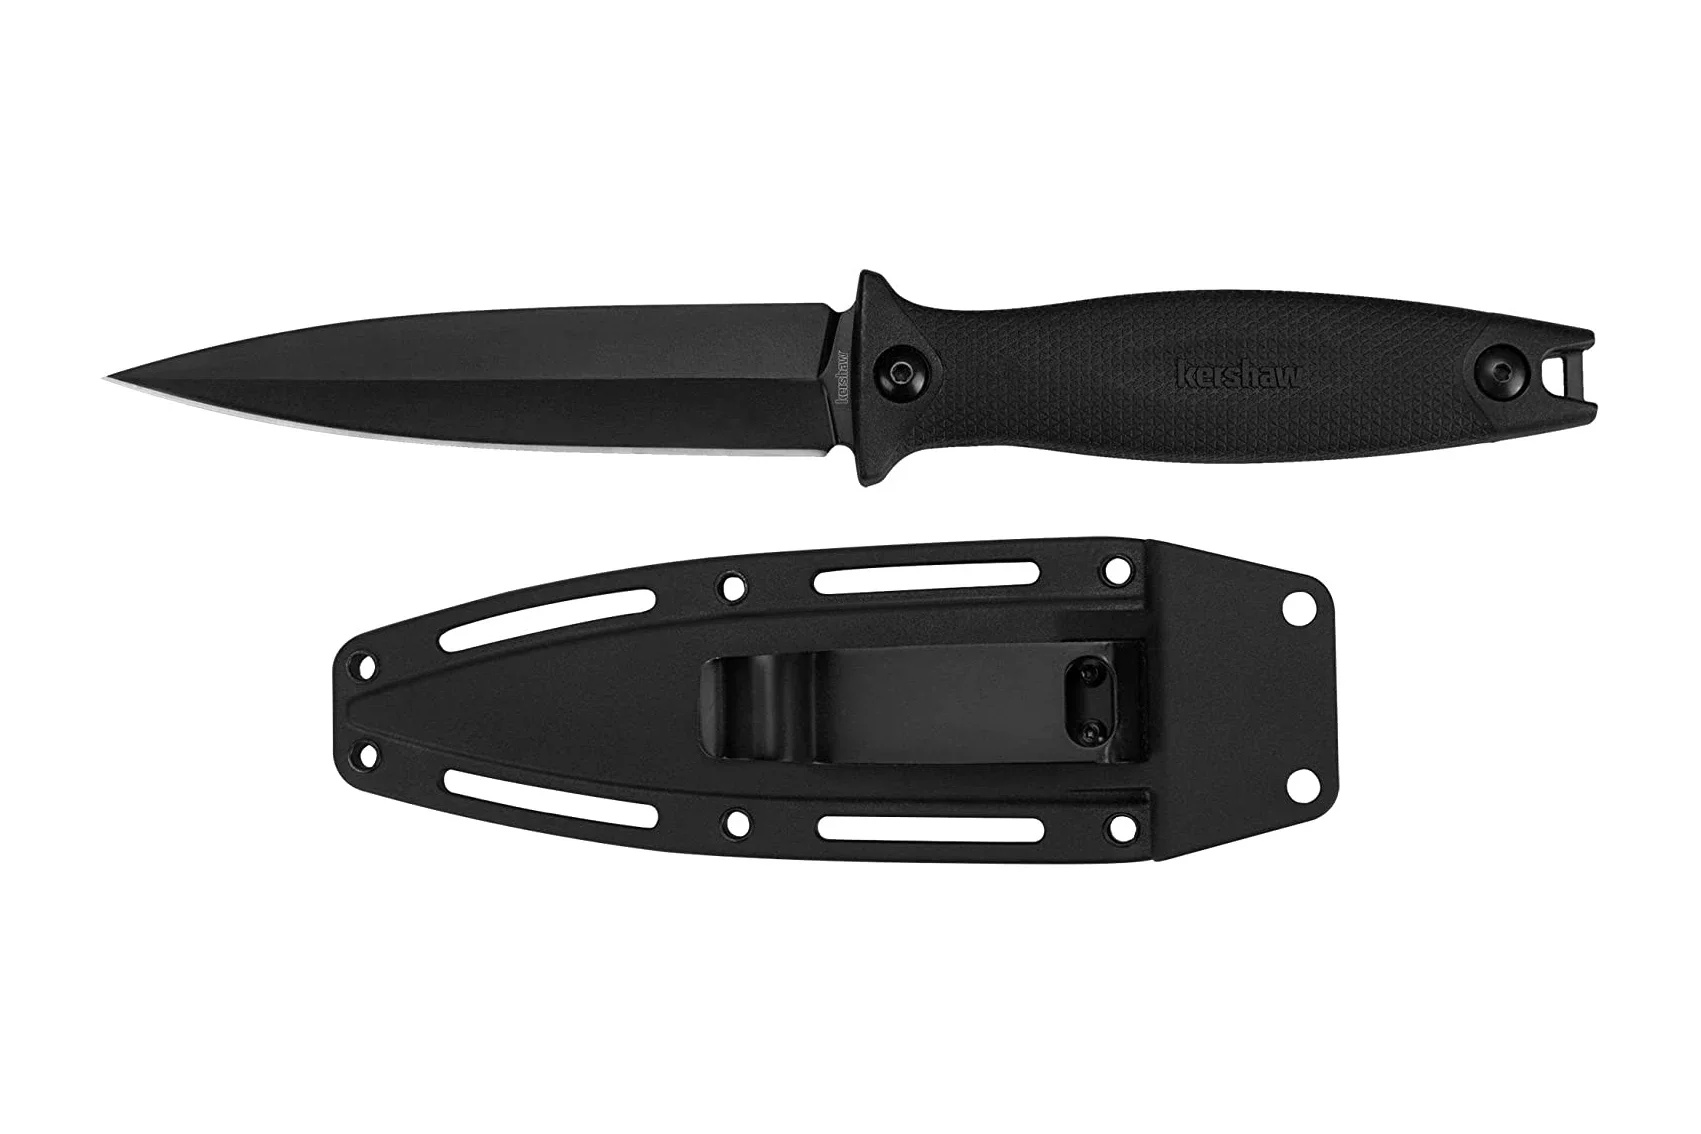 

Kershaw 4007 Fixed Blade Knife 8cr13 Blade ABS Handle Tactical Hunting Outdoor Camping Survival Straight Knives EDC Diving Tool